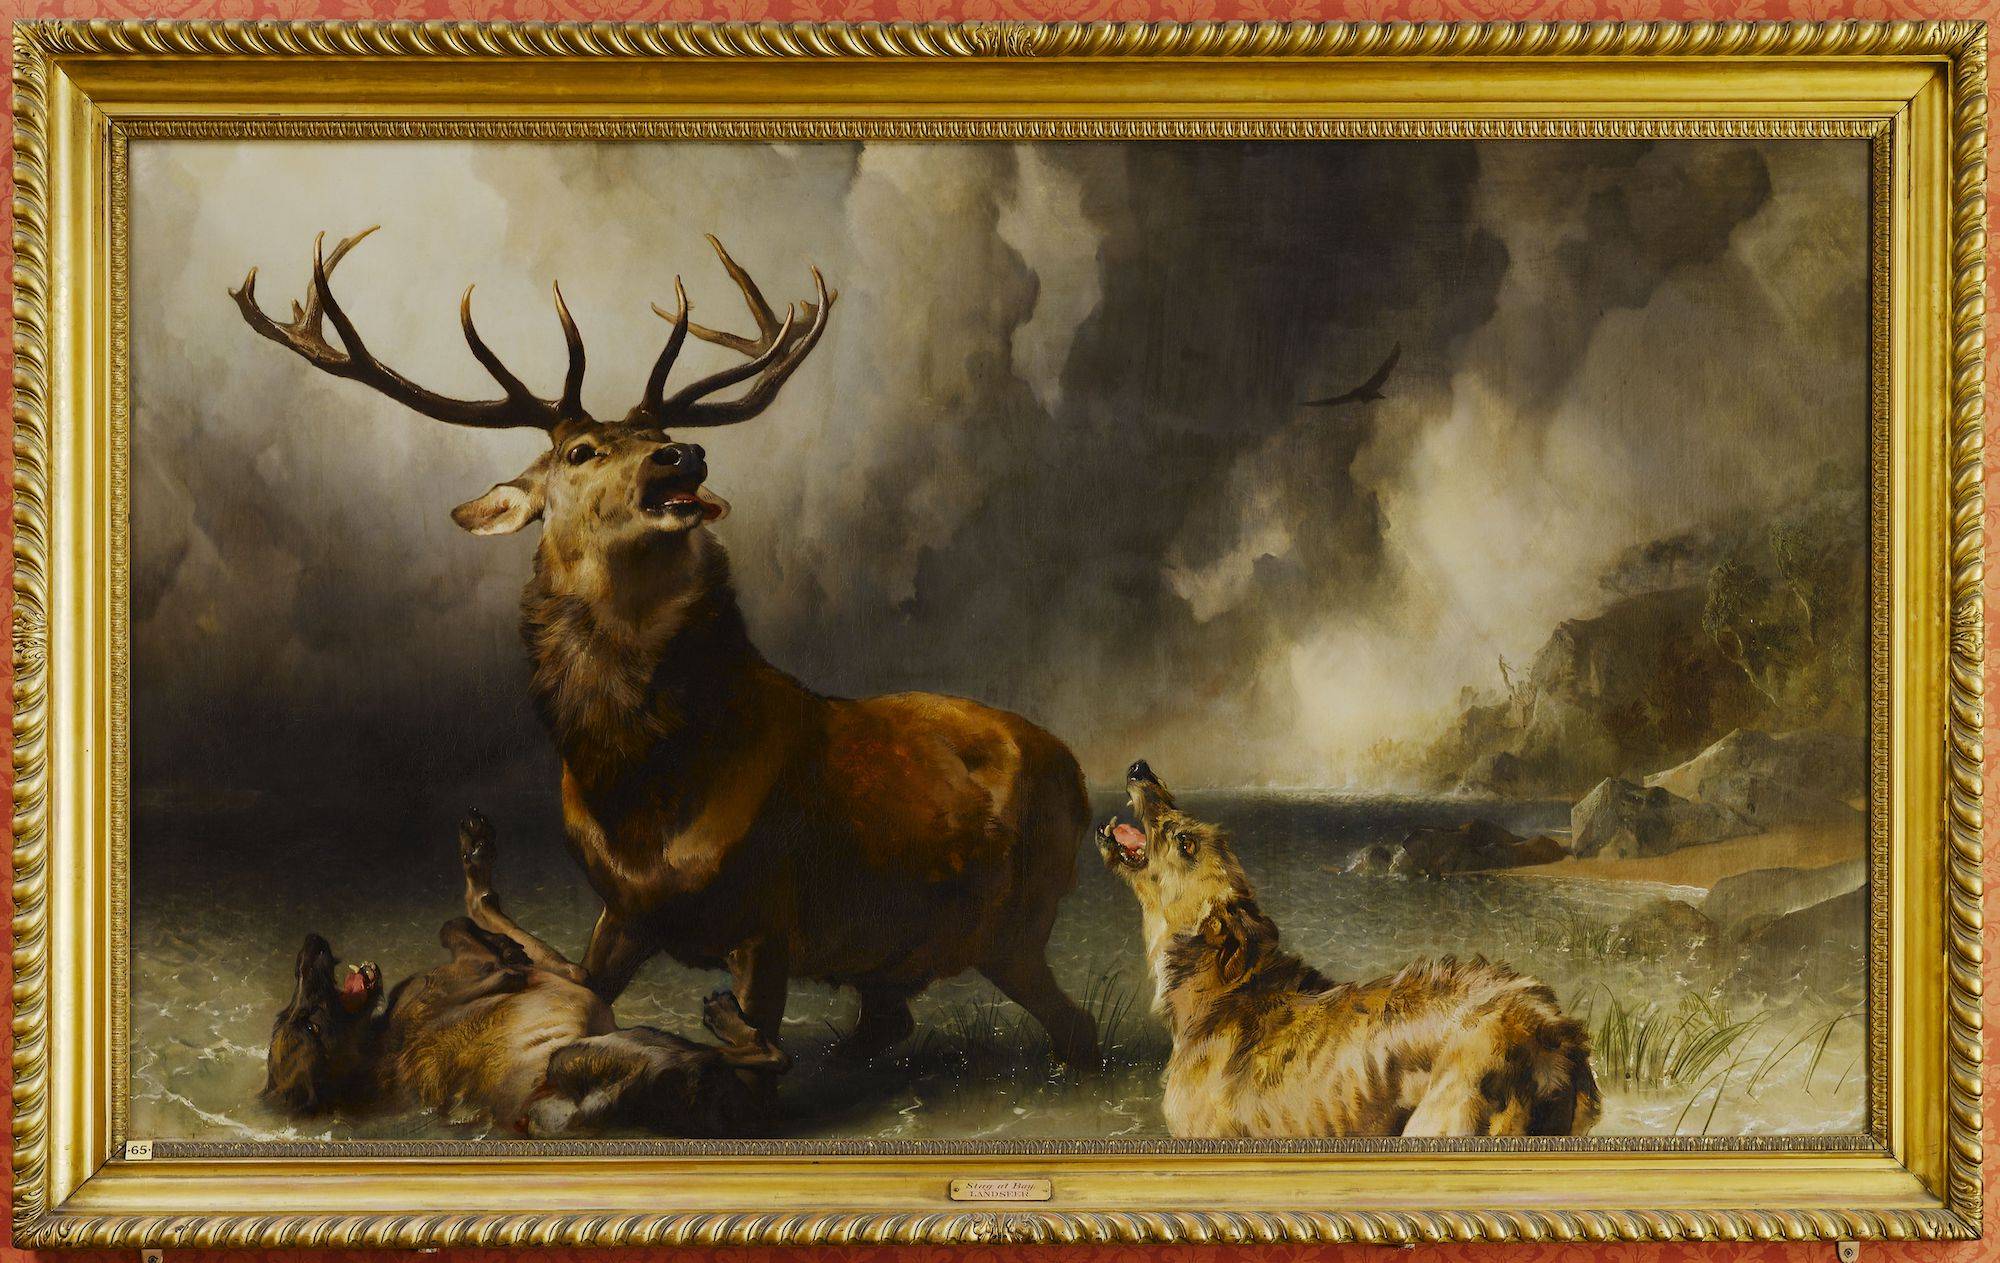 Stag at Bay by Edwin Landseer, 1846